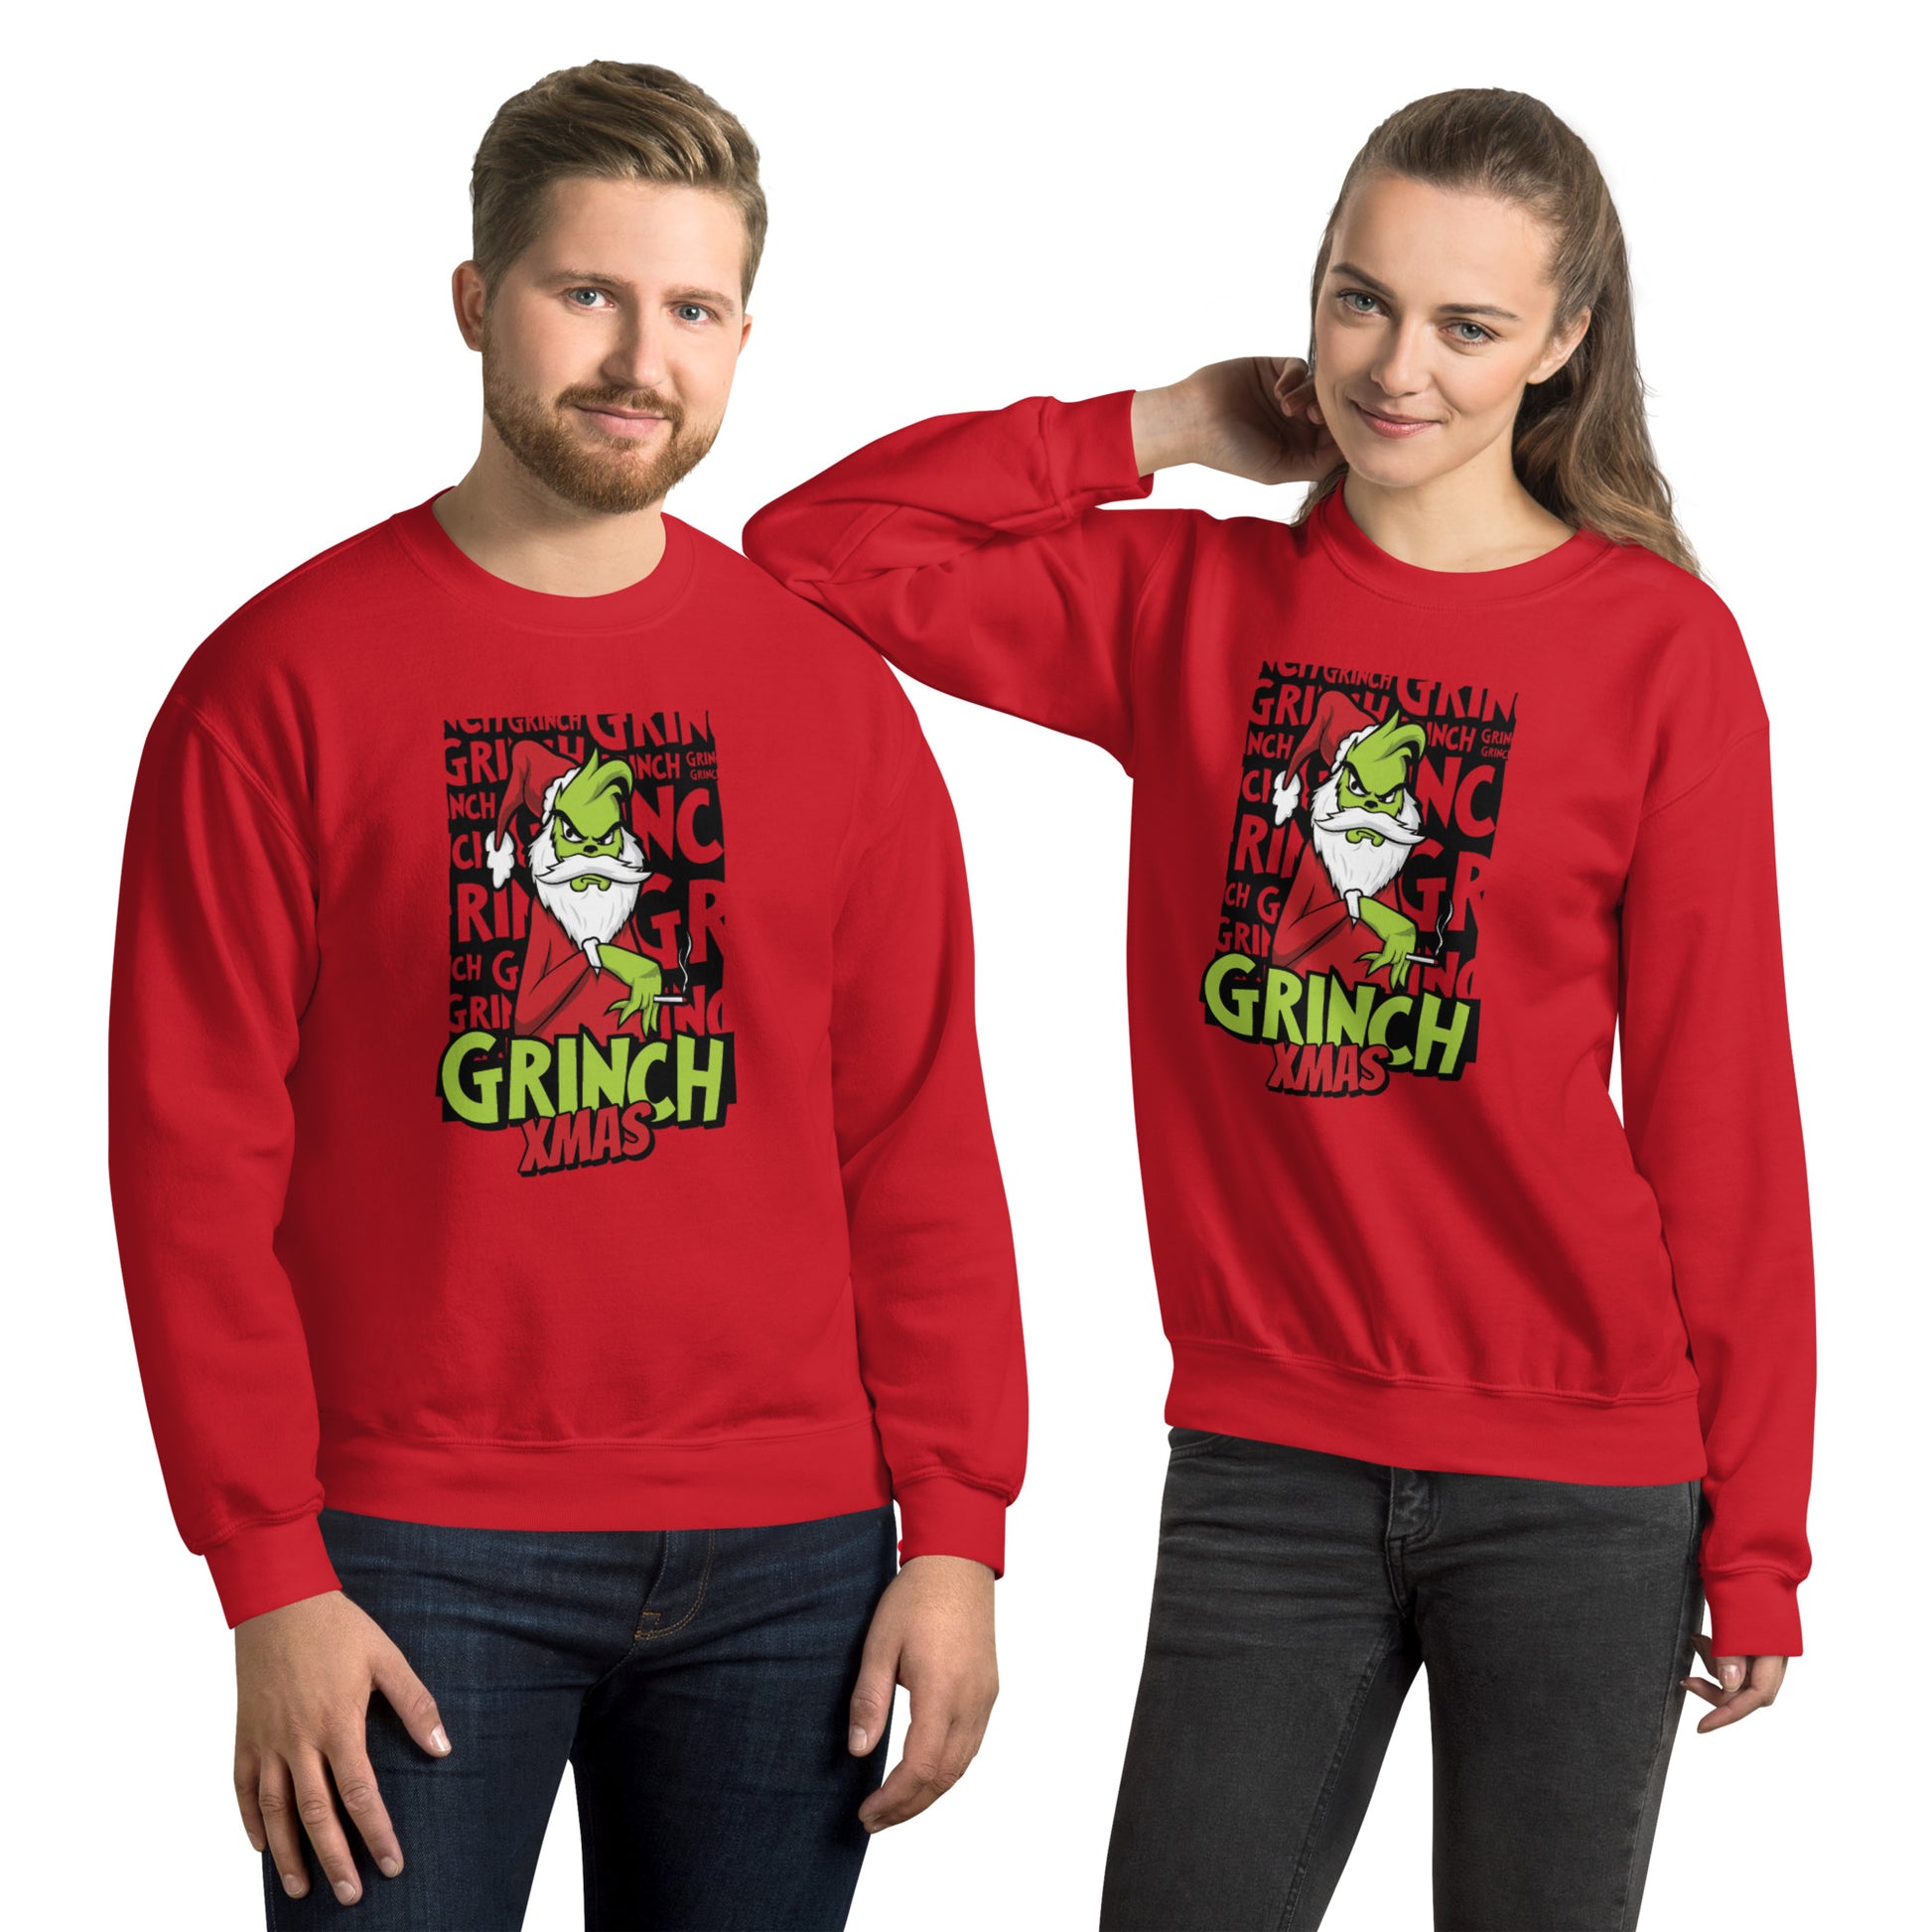 Grinch Xmas Unisex Sweatshirt - Embrace Your Inner Grinch with Festive Comfort | Holiday Cheer, Warmth, and Whimsy